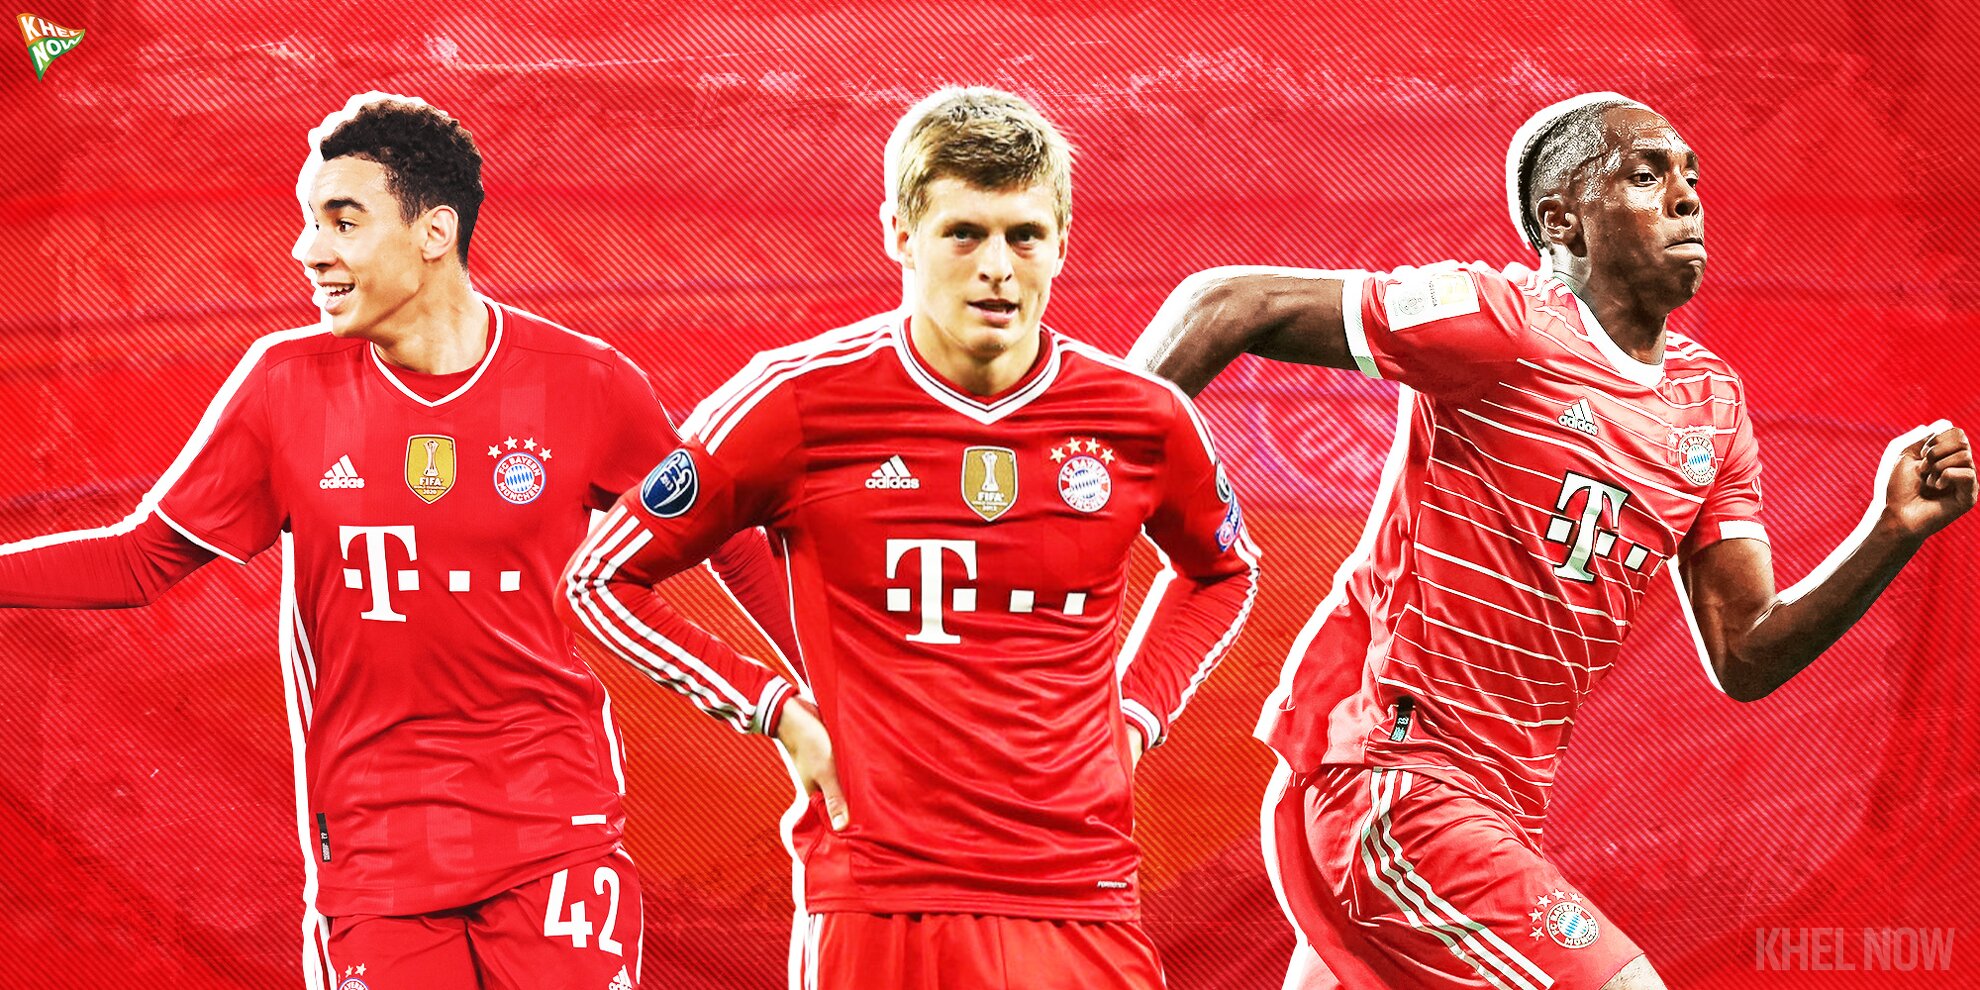 Top 10 Youngest Goal Scorers in Bayern Munich history